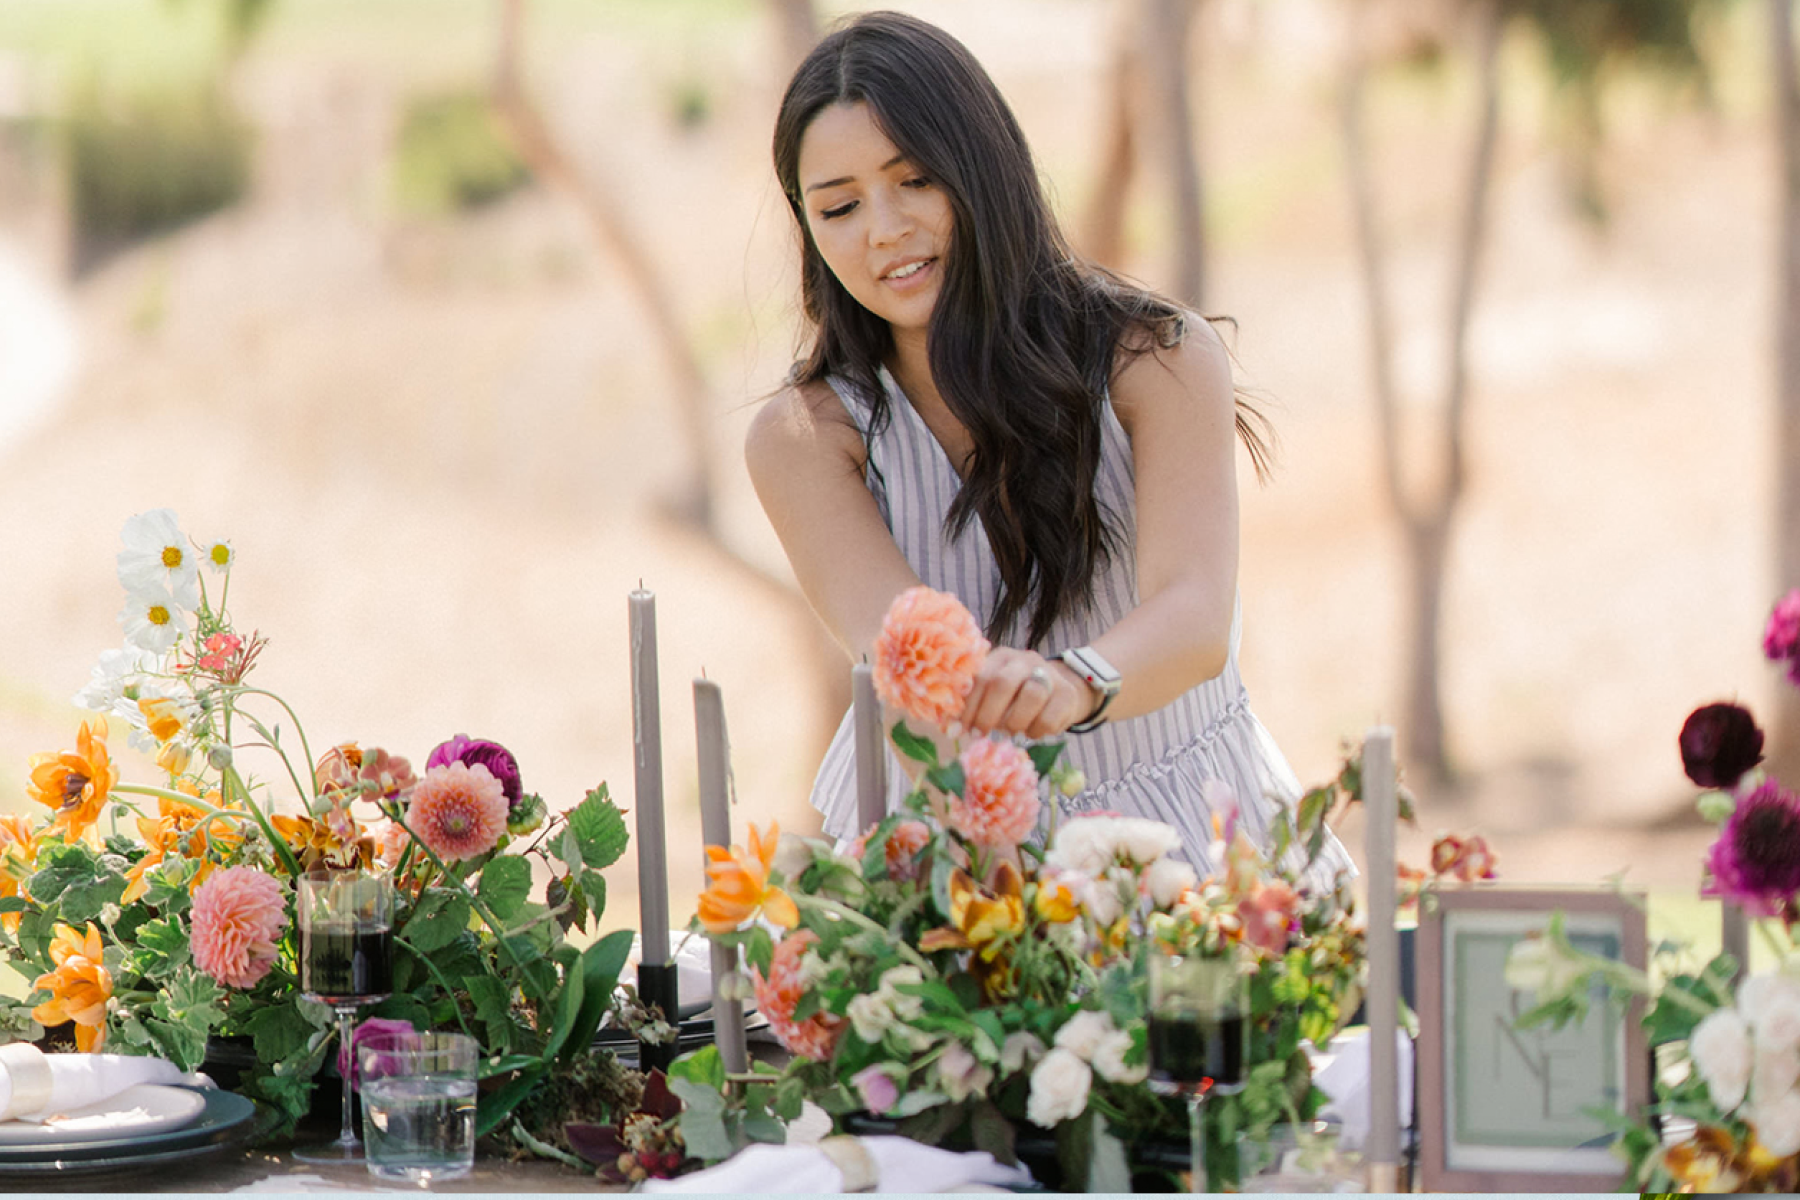 A woman arranging flower centerpieces on a long table on a warm day.